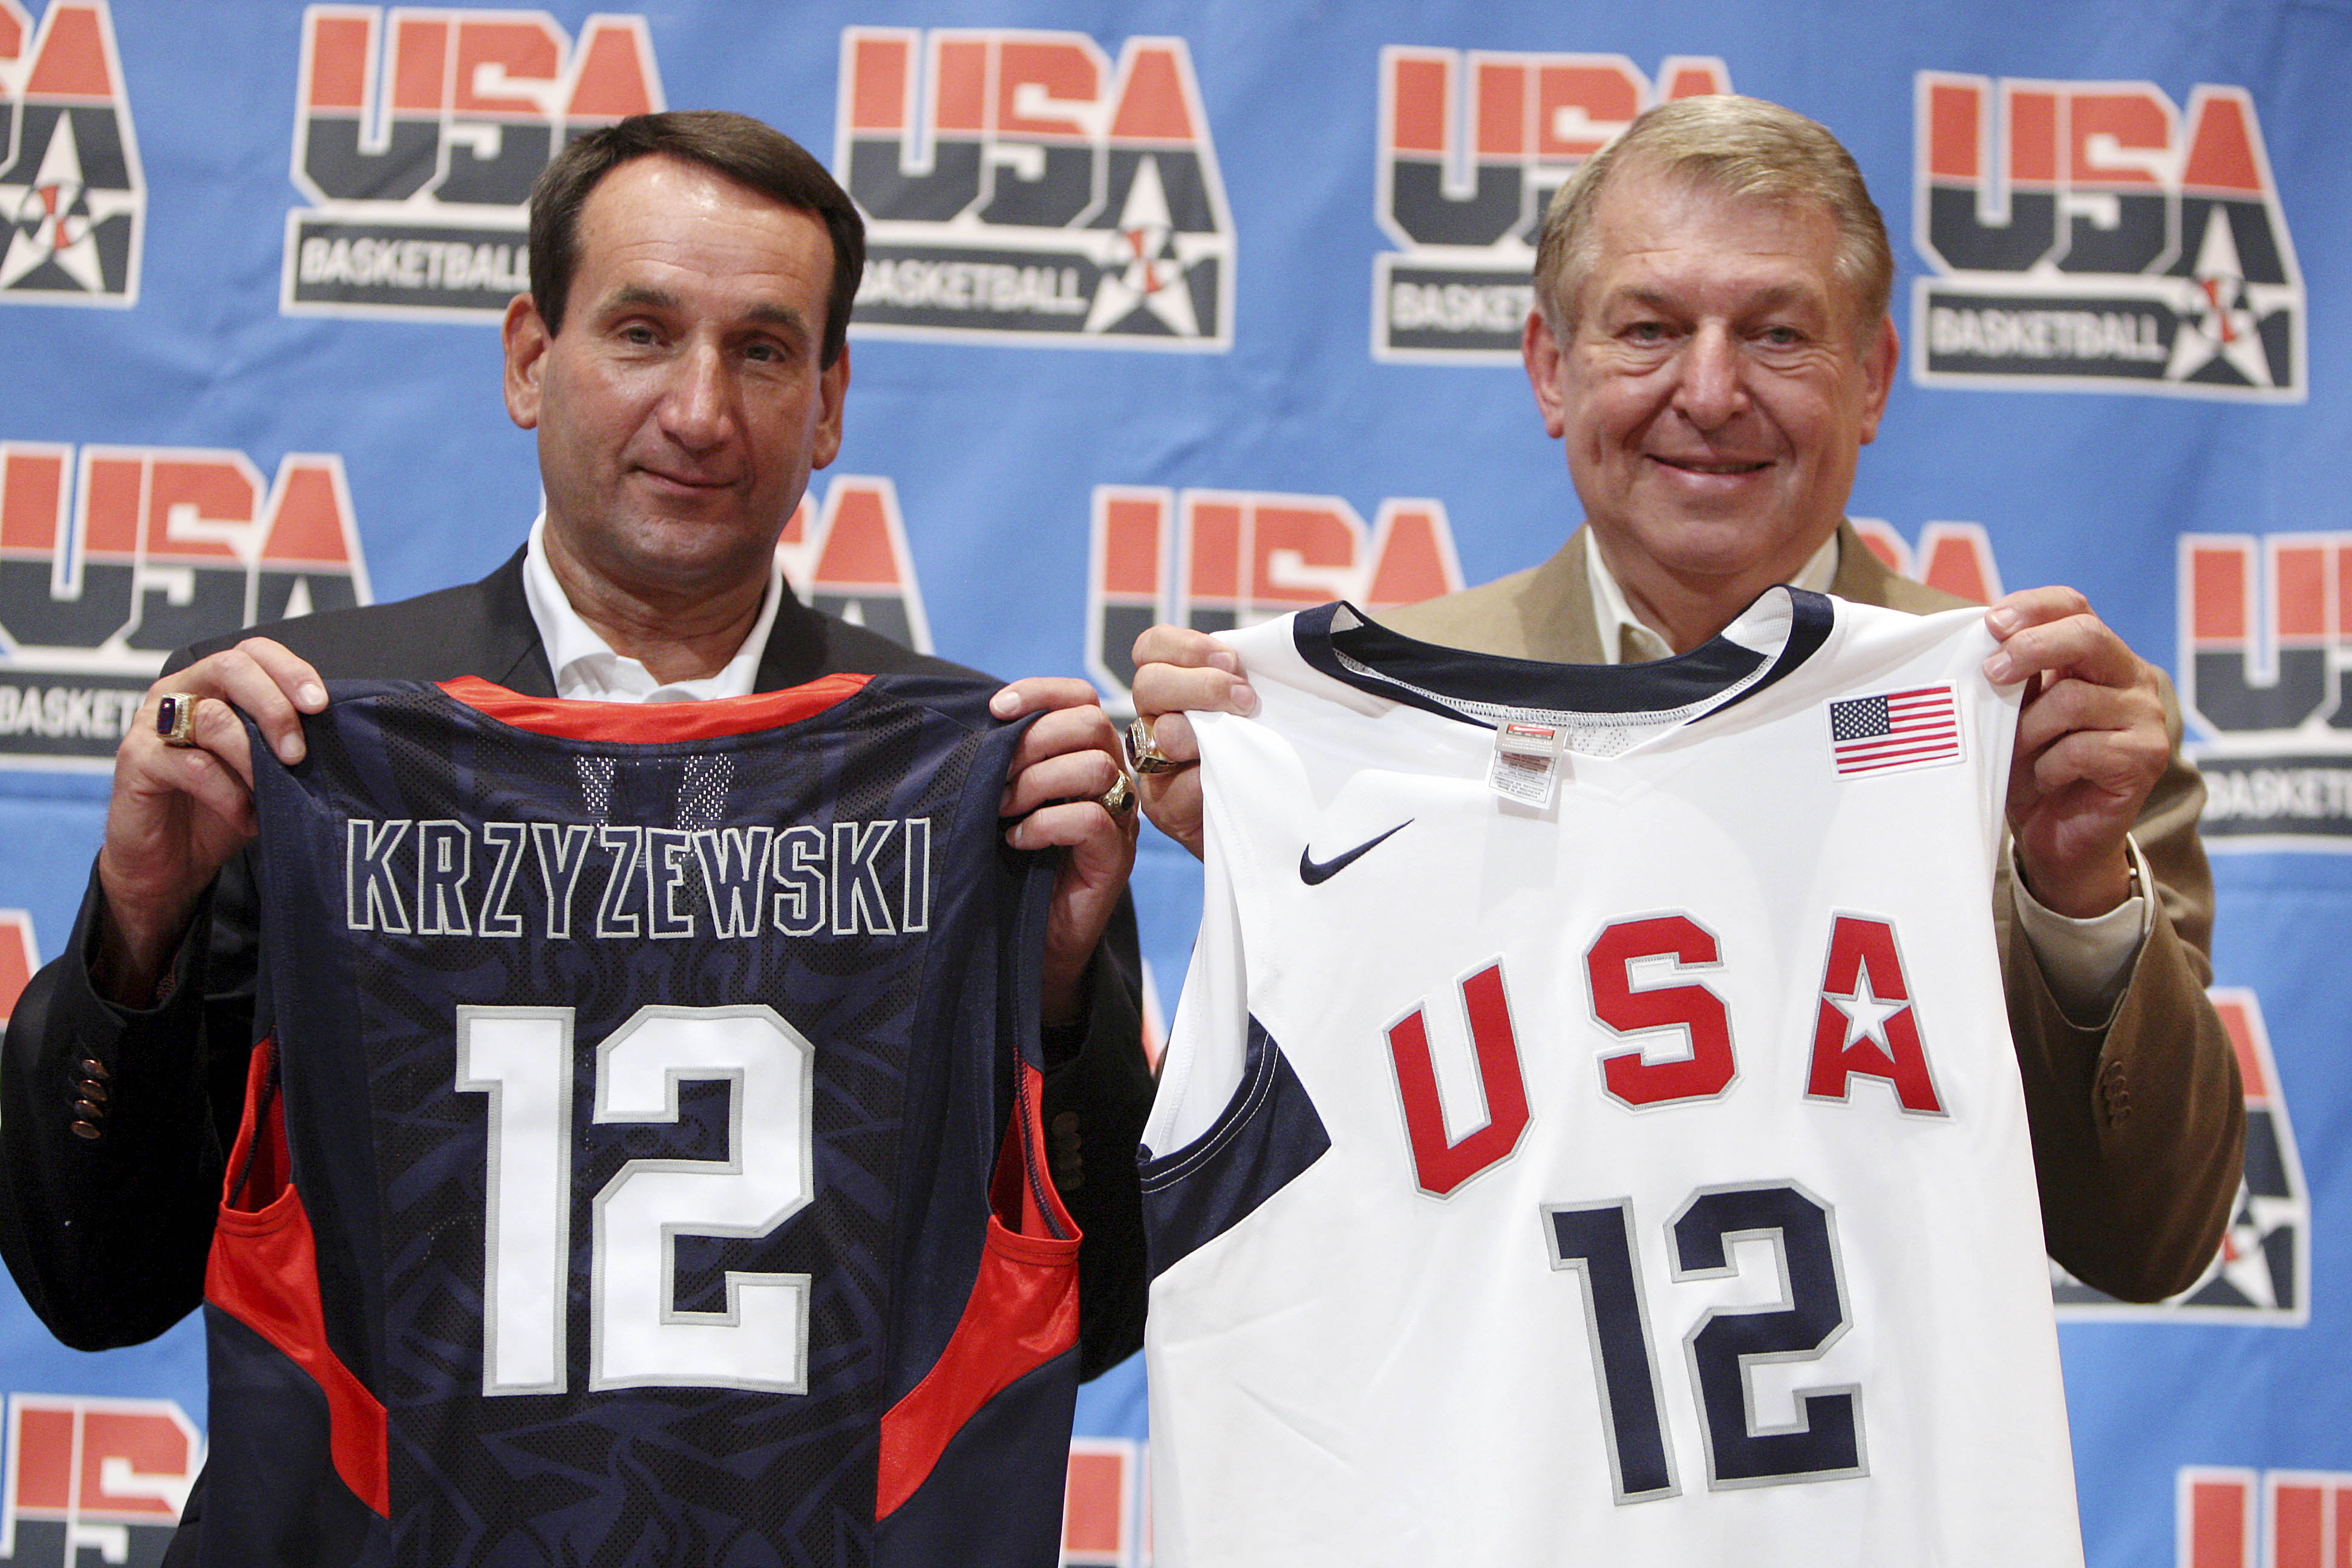 Colangelo says 2012 Olympic squad “fair comparison” with Dream